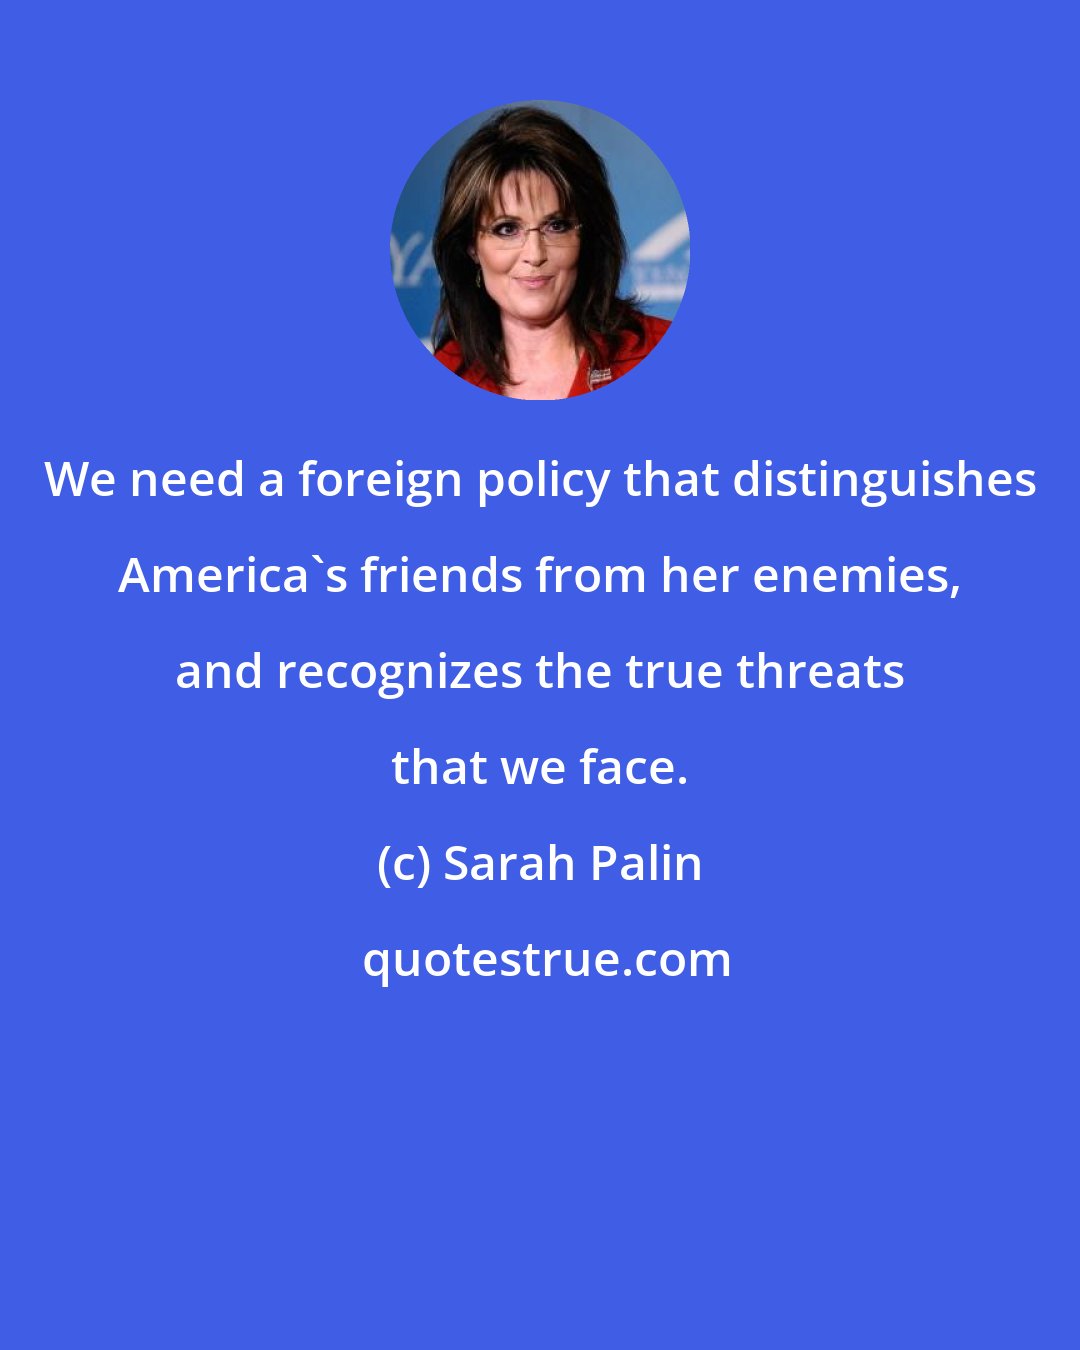 Sarah Palin: We need a foreign policy that distinguishes America's friends from her enemies, and recognizes the true threats that we face.